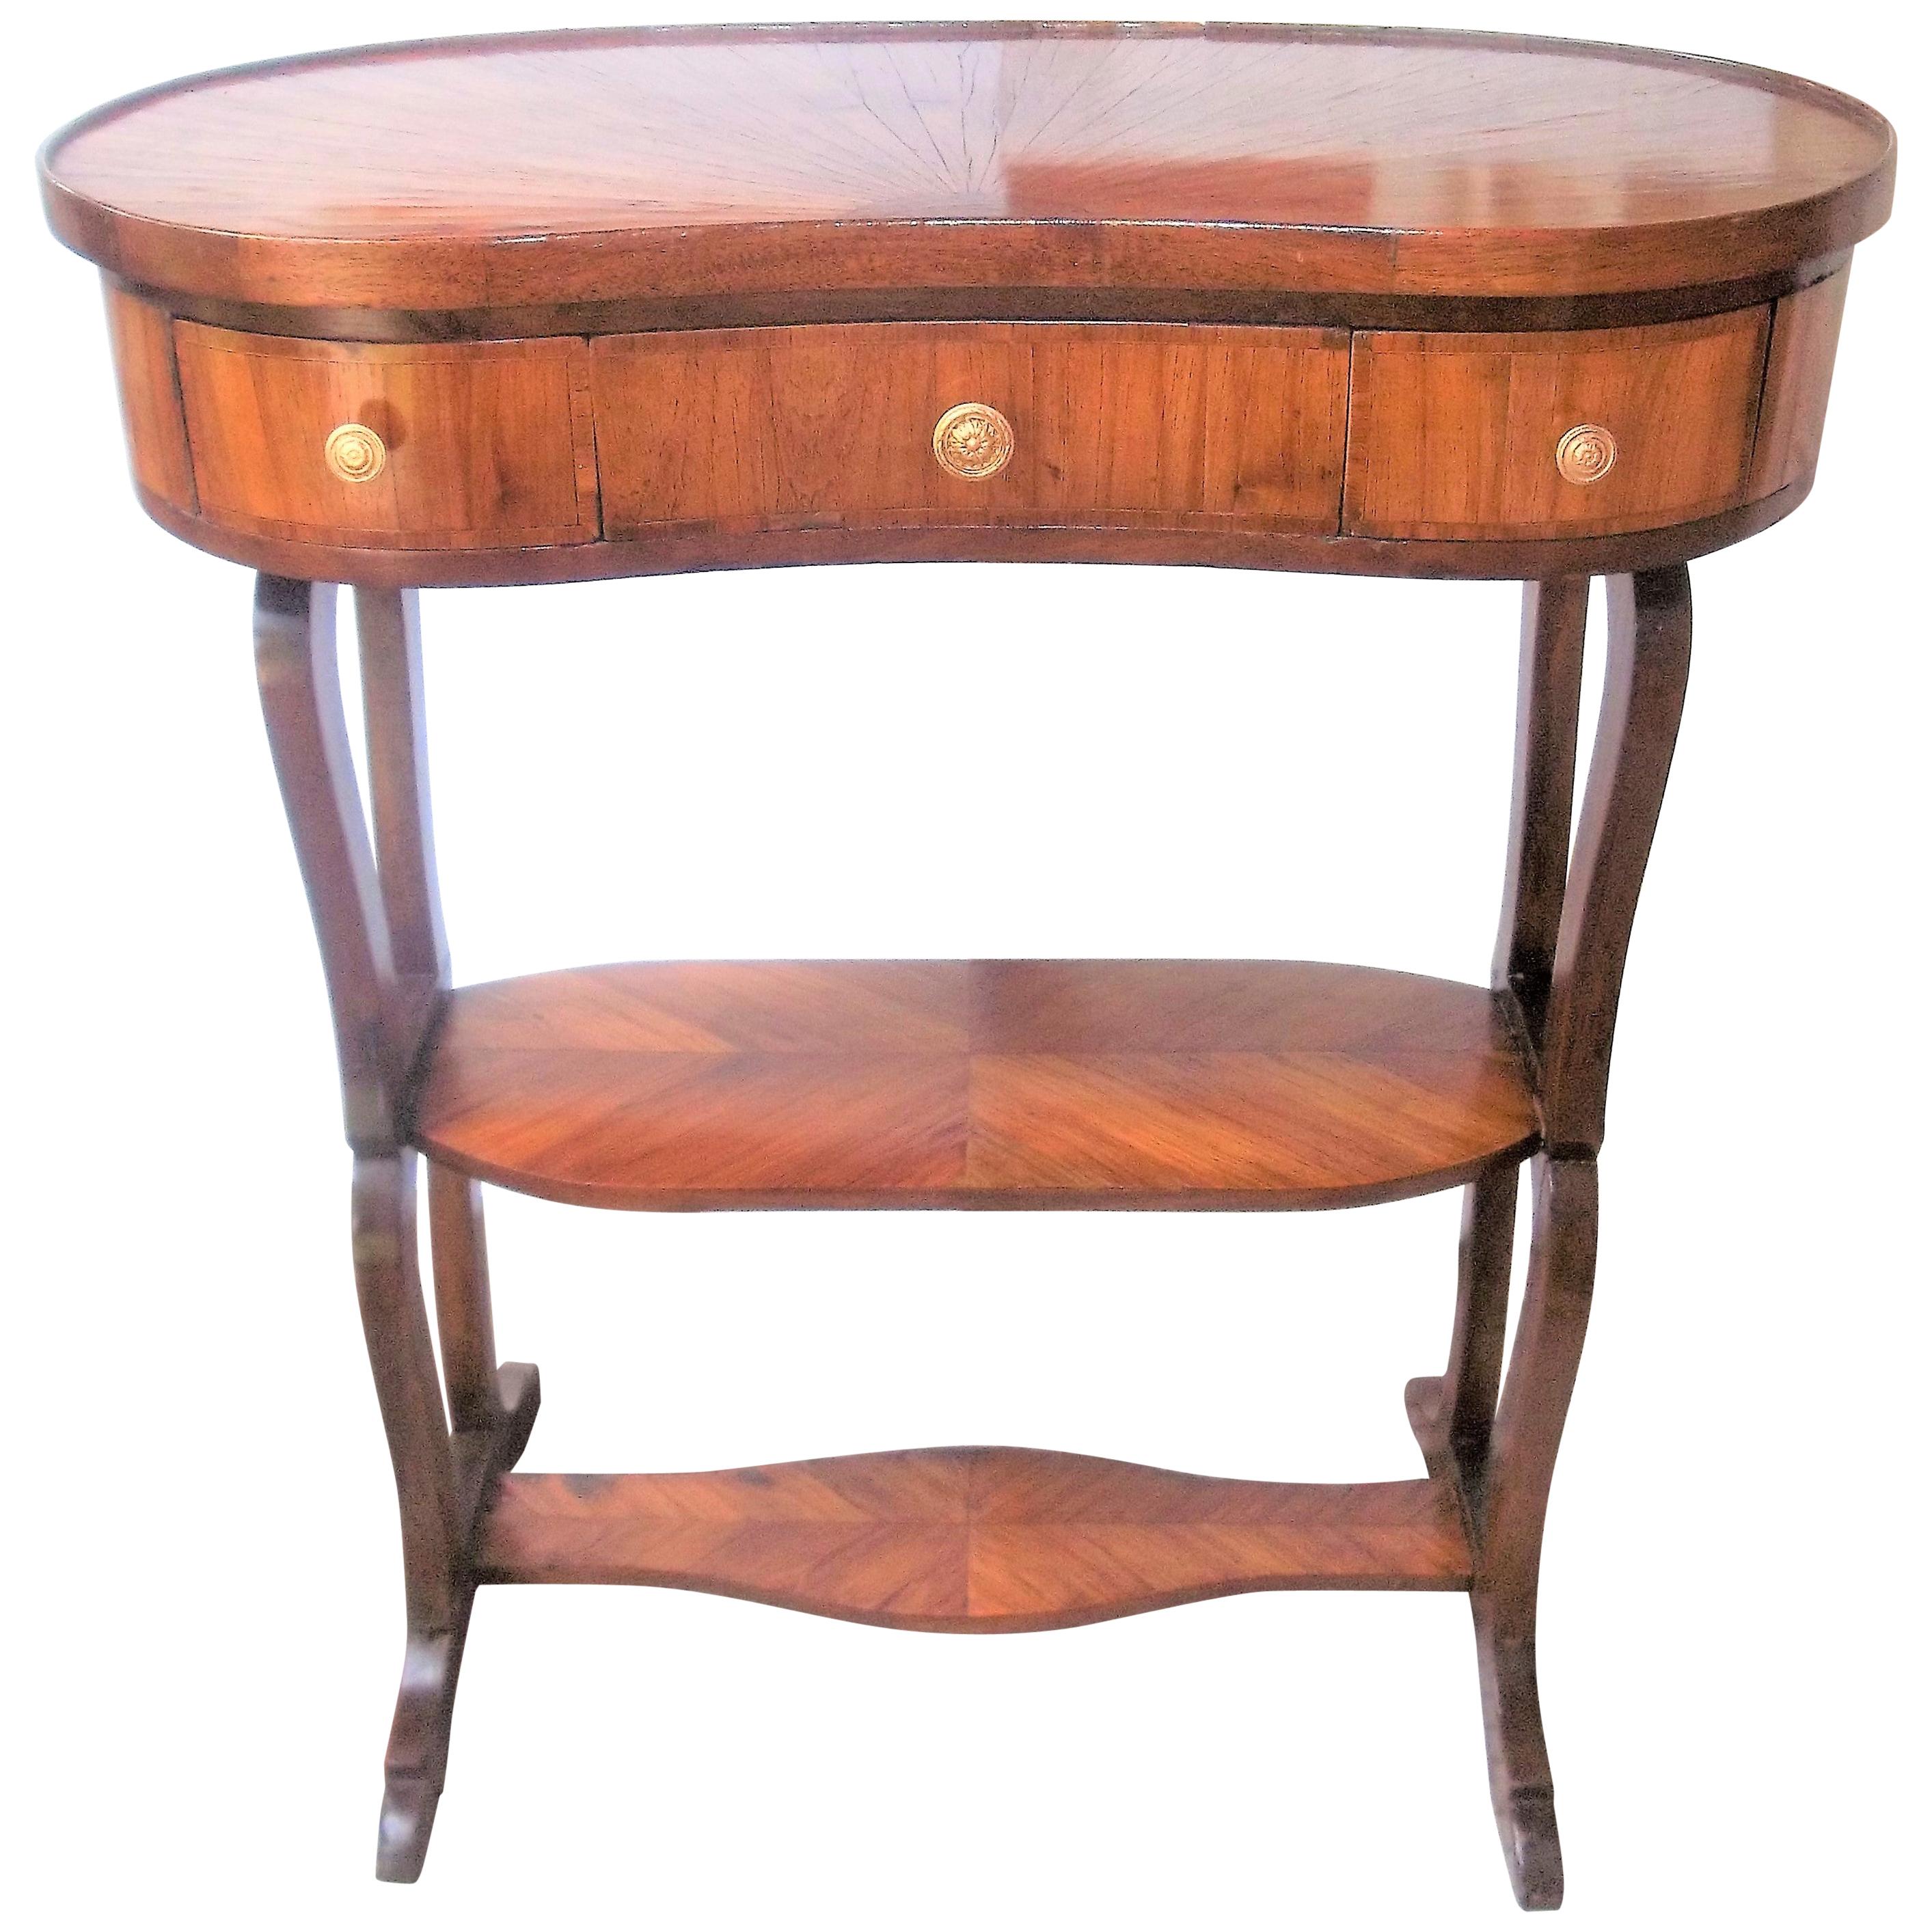 Louis Xvi Style Tulipwood Three-Tiered Desk or Dressing Table with Sunburst Top